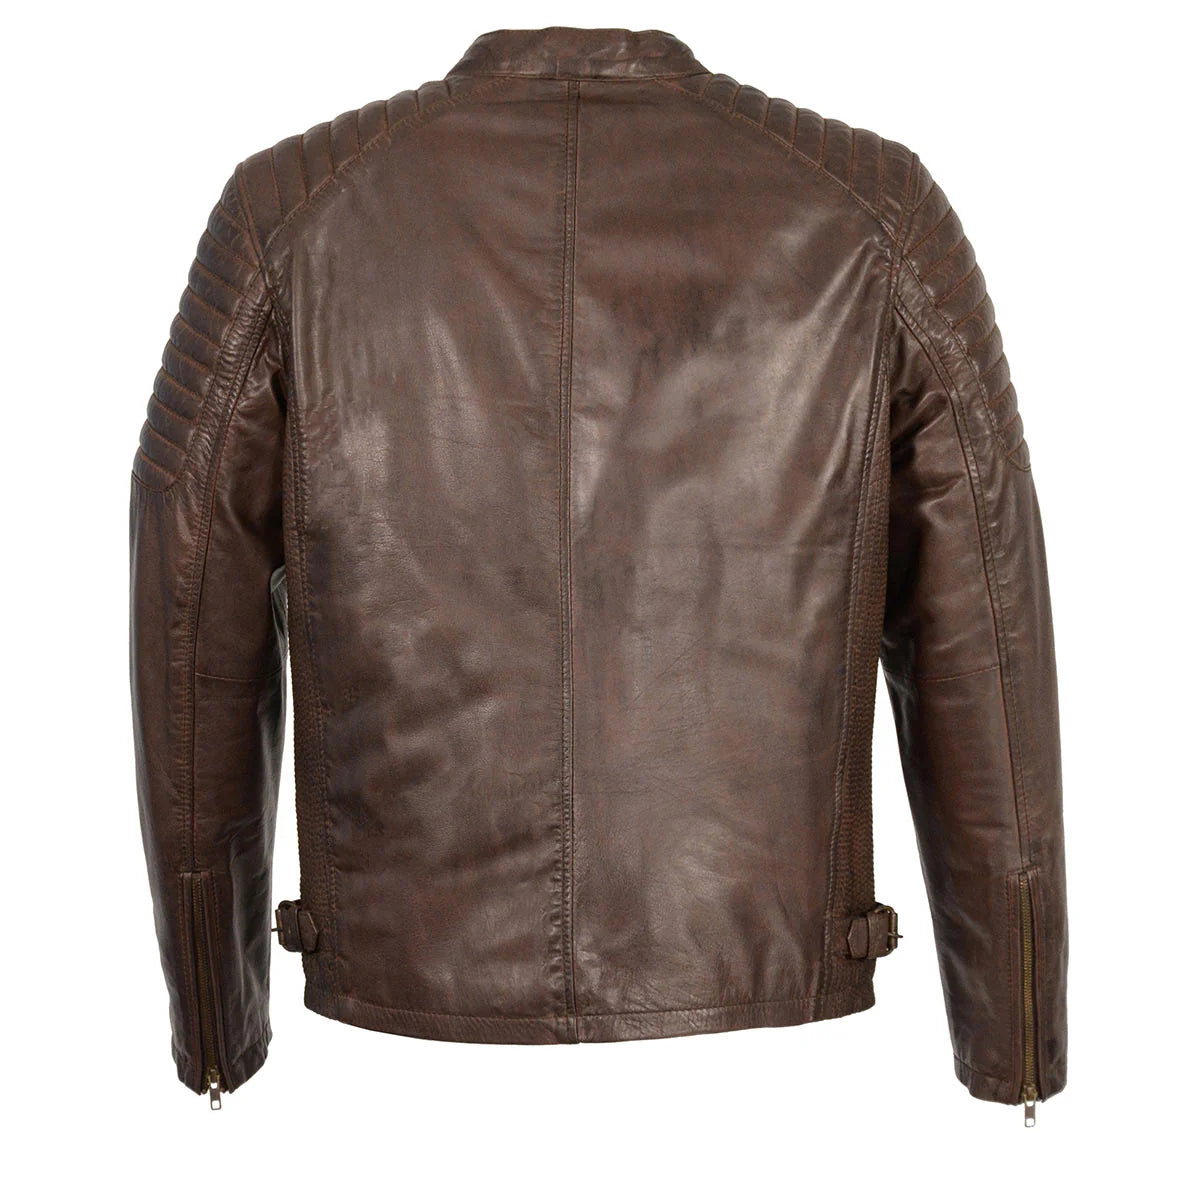 Men's 'Quilted' Brown Leather Fashion Jacket with Snap Button Collar